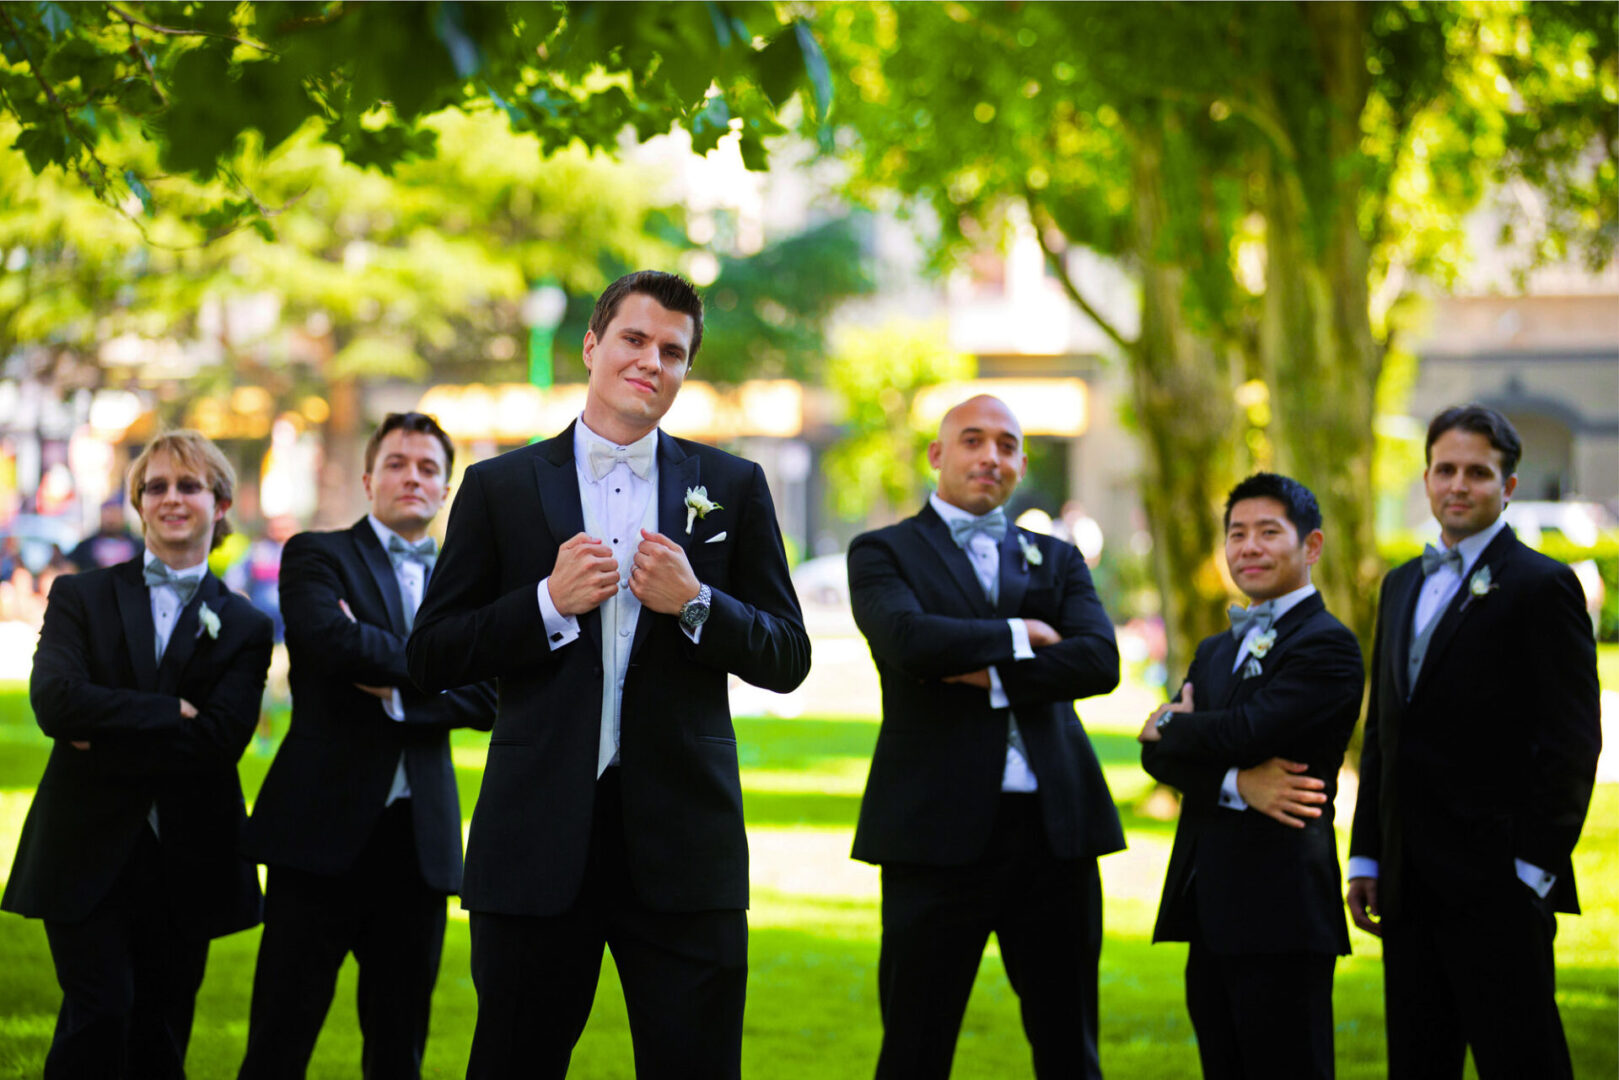 A groom standing with some other peoples in a field